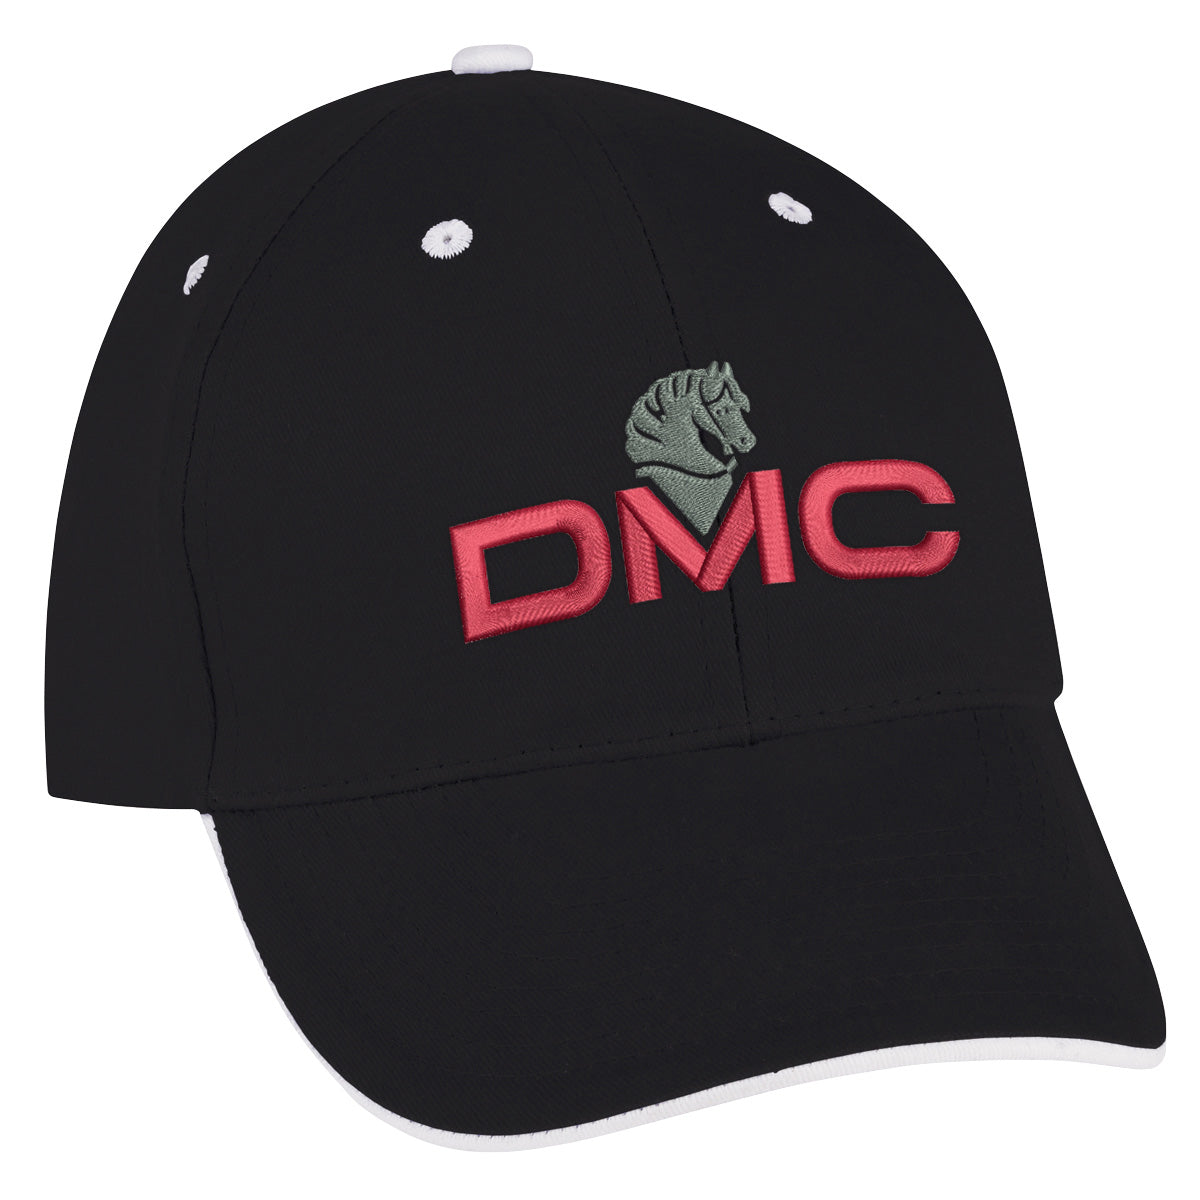 Elite Cap Hats Hit Promo Black with White Trim Embroidered 